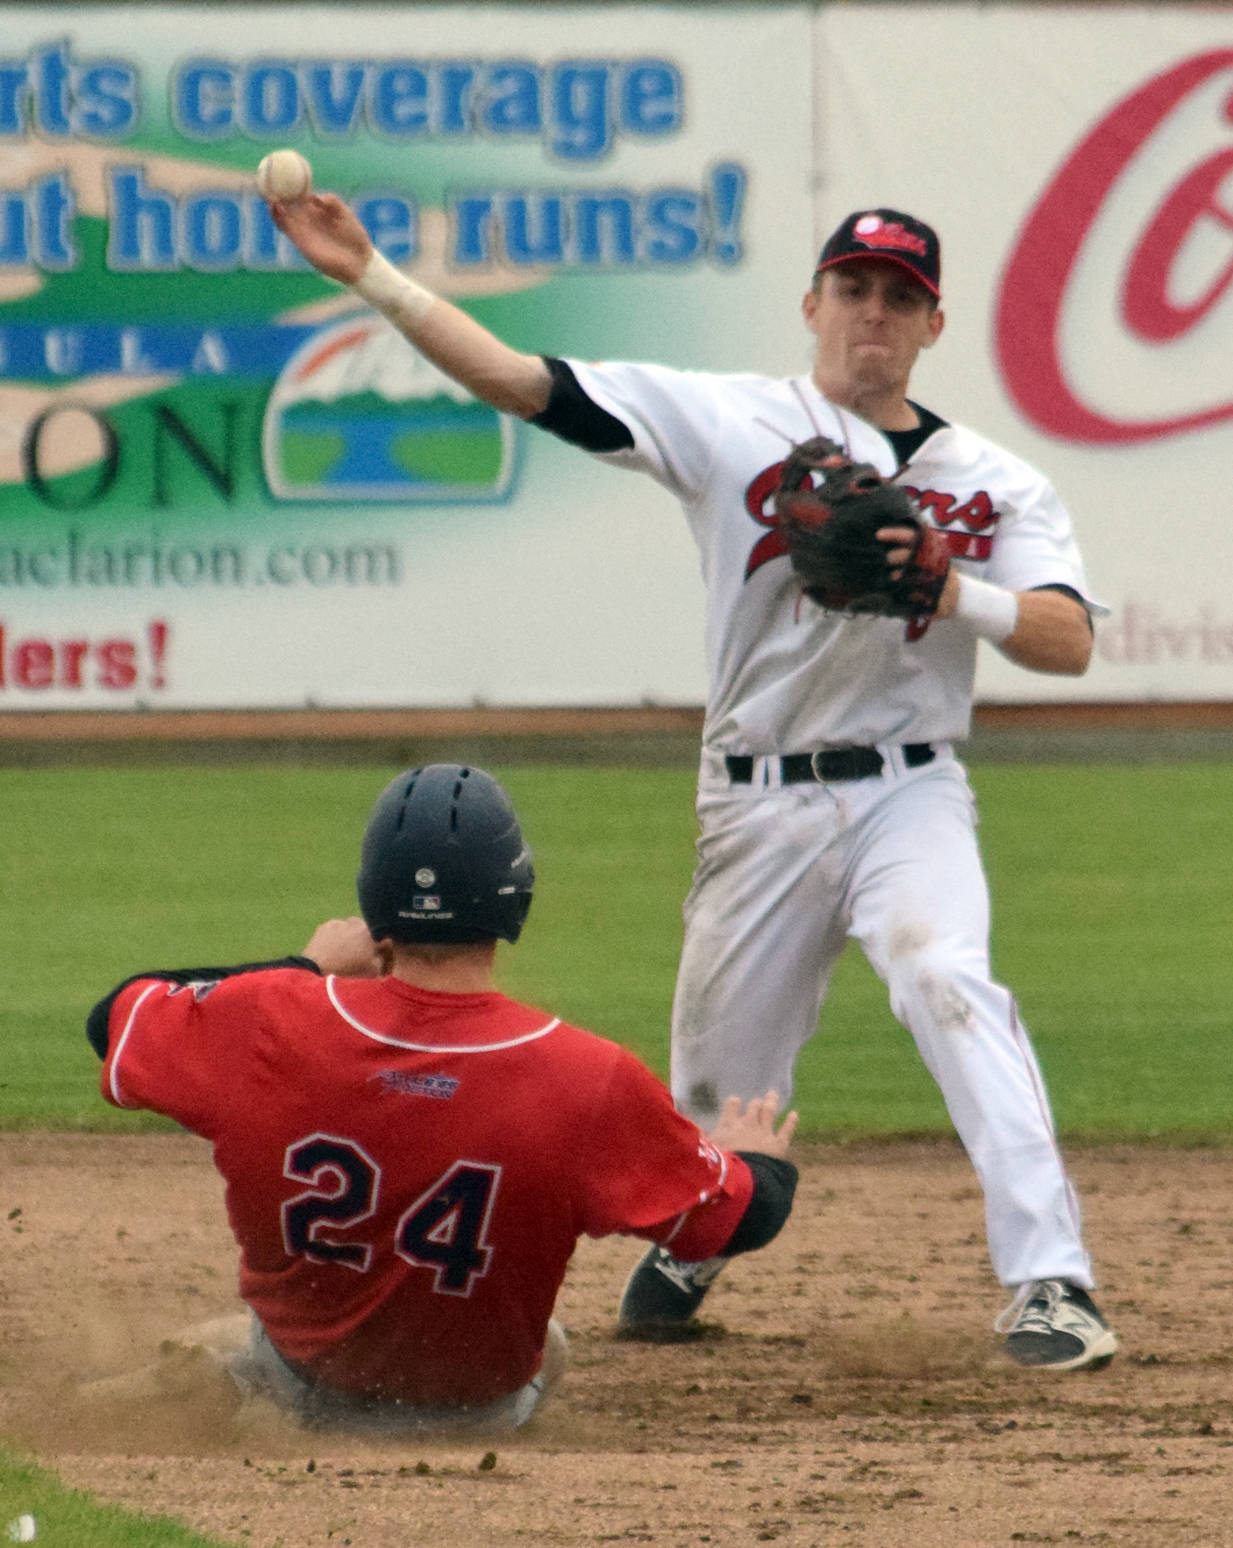 Peninsula Oilers second baseman Oliver Dunn turns a double play in front of the slide of Micah Pries of the Chugiak-Eagle River Chinooks in the fifth inning Friday, June 30, 2017, at Coral Seymour Memorial Park in Kenai. (Photo by Jeff Helminiak/Peninsula Clarion)